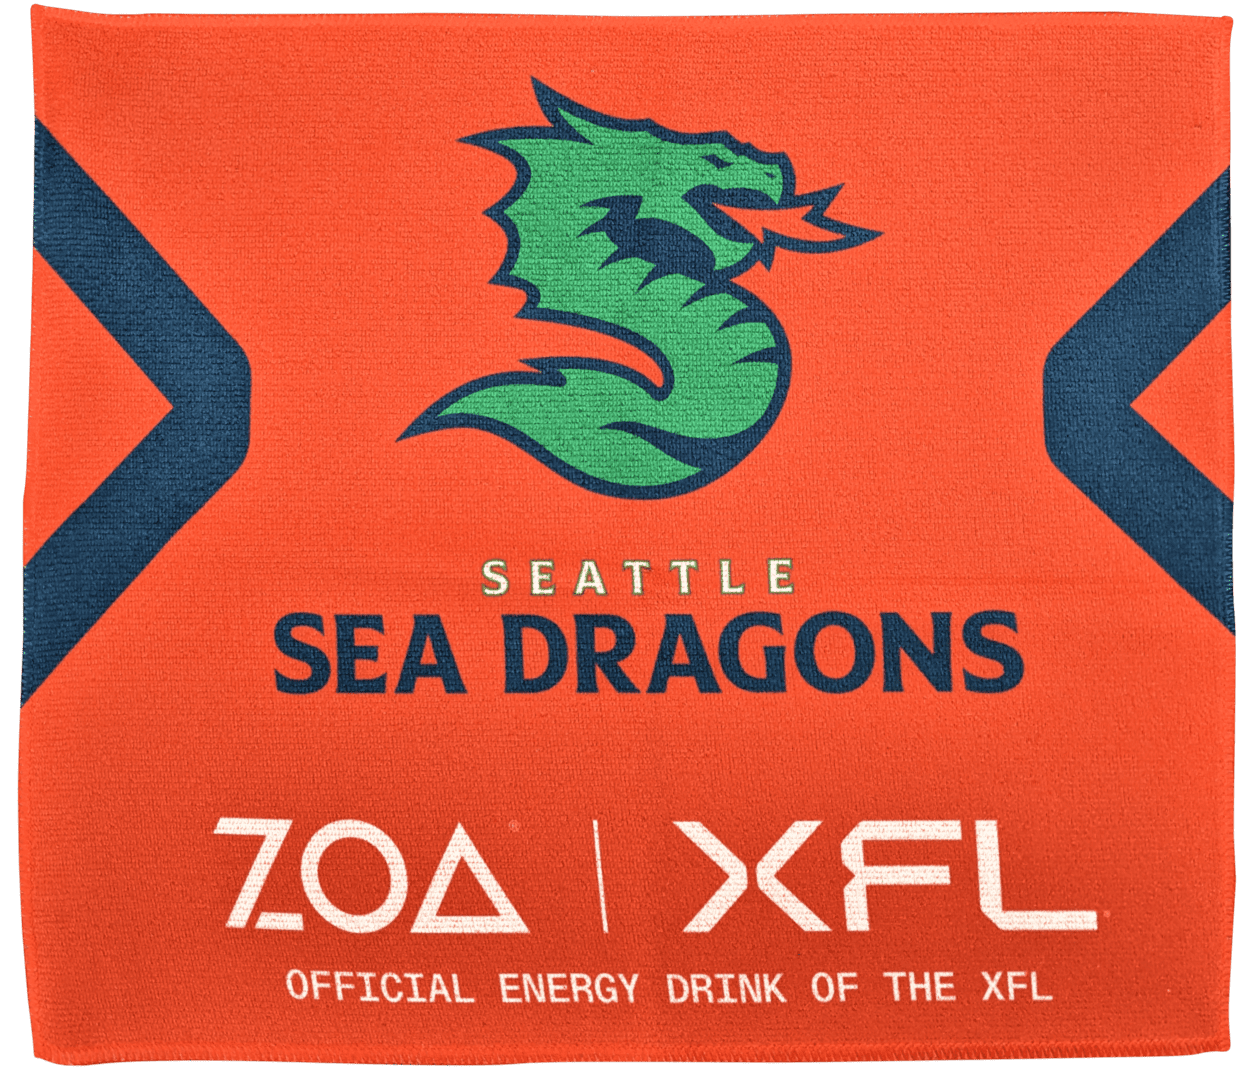 Seattle sea dragons text printed on a cloth